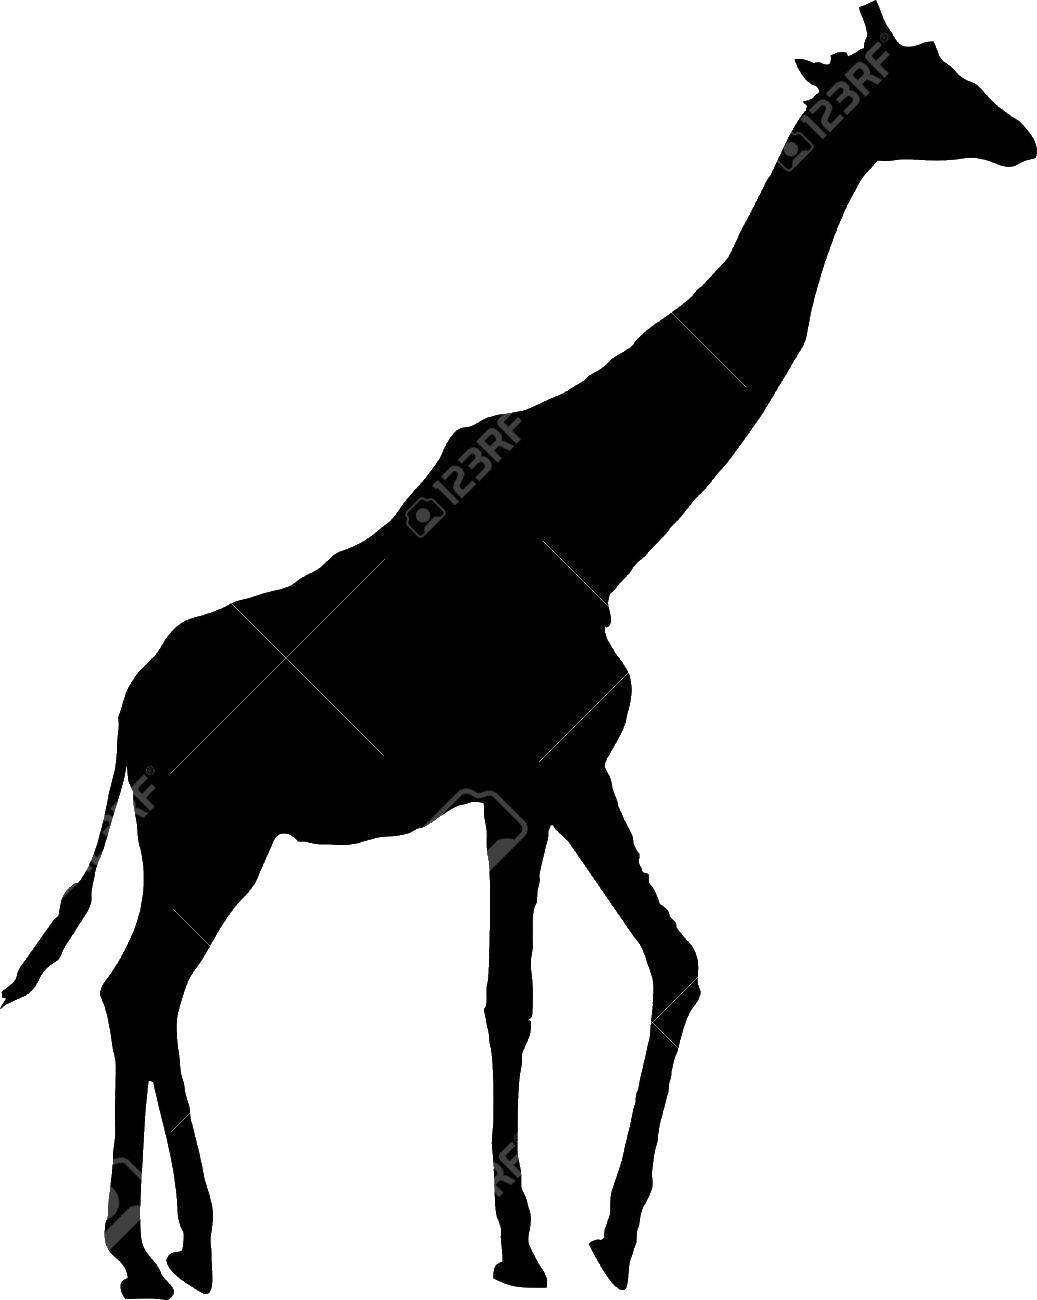 Coloring Zhirafik. Category The outline of a giraffe for cutting. Tags:  Animals, giraffe.